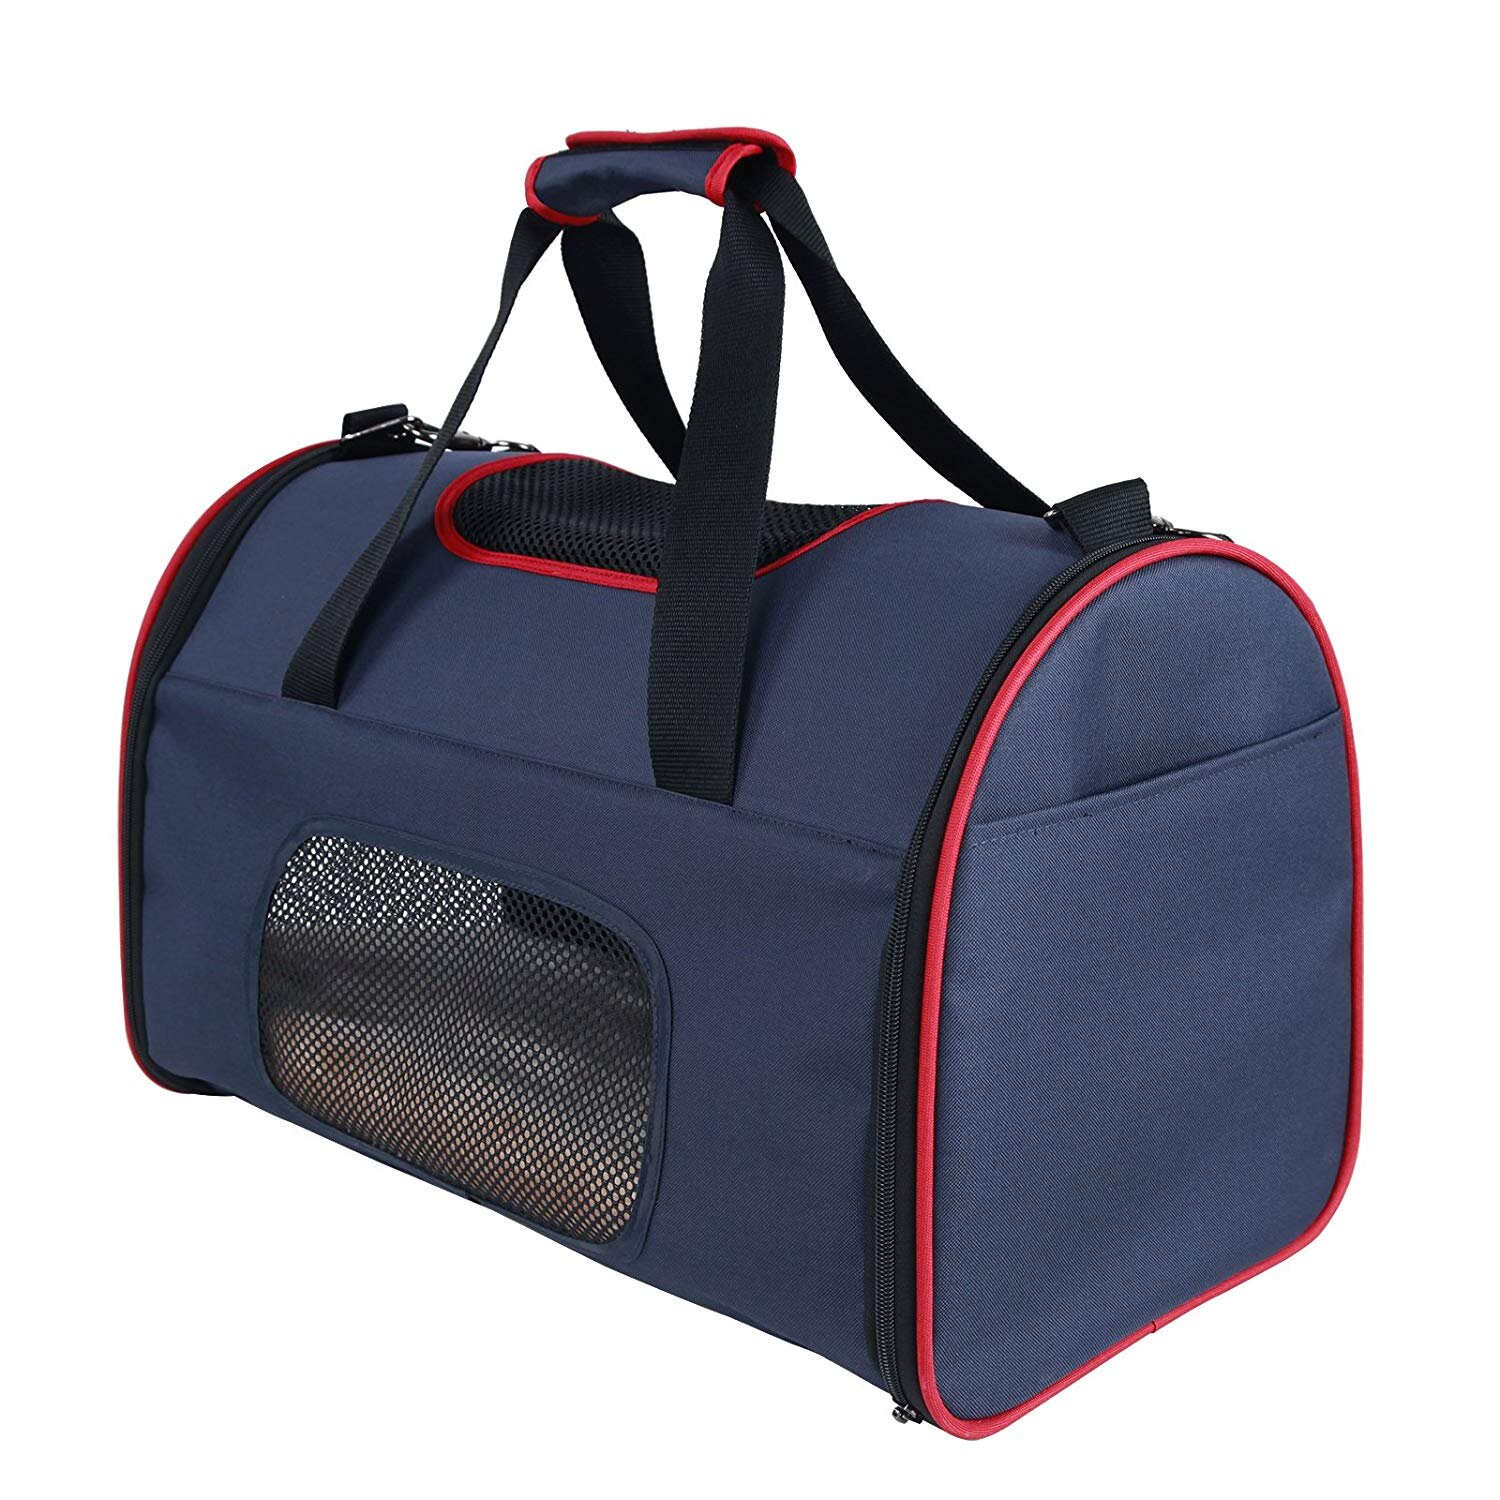 Petsfit Pet Carrier Bag for Plane Airline Approved Waterproof